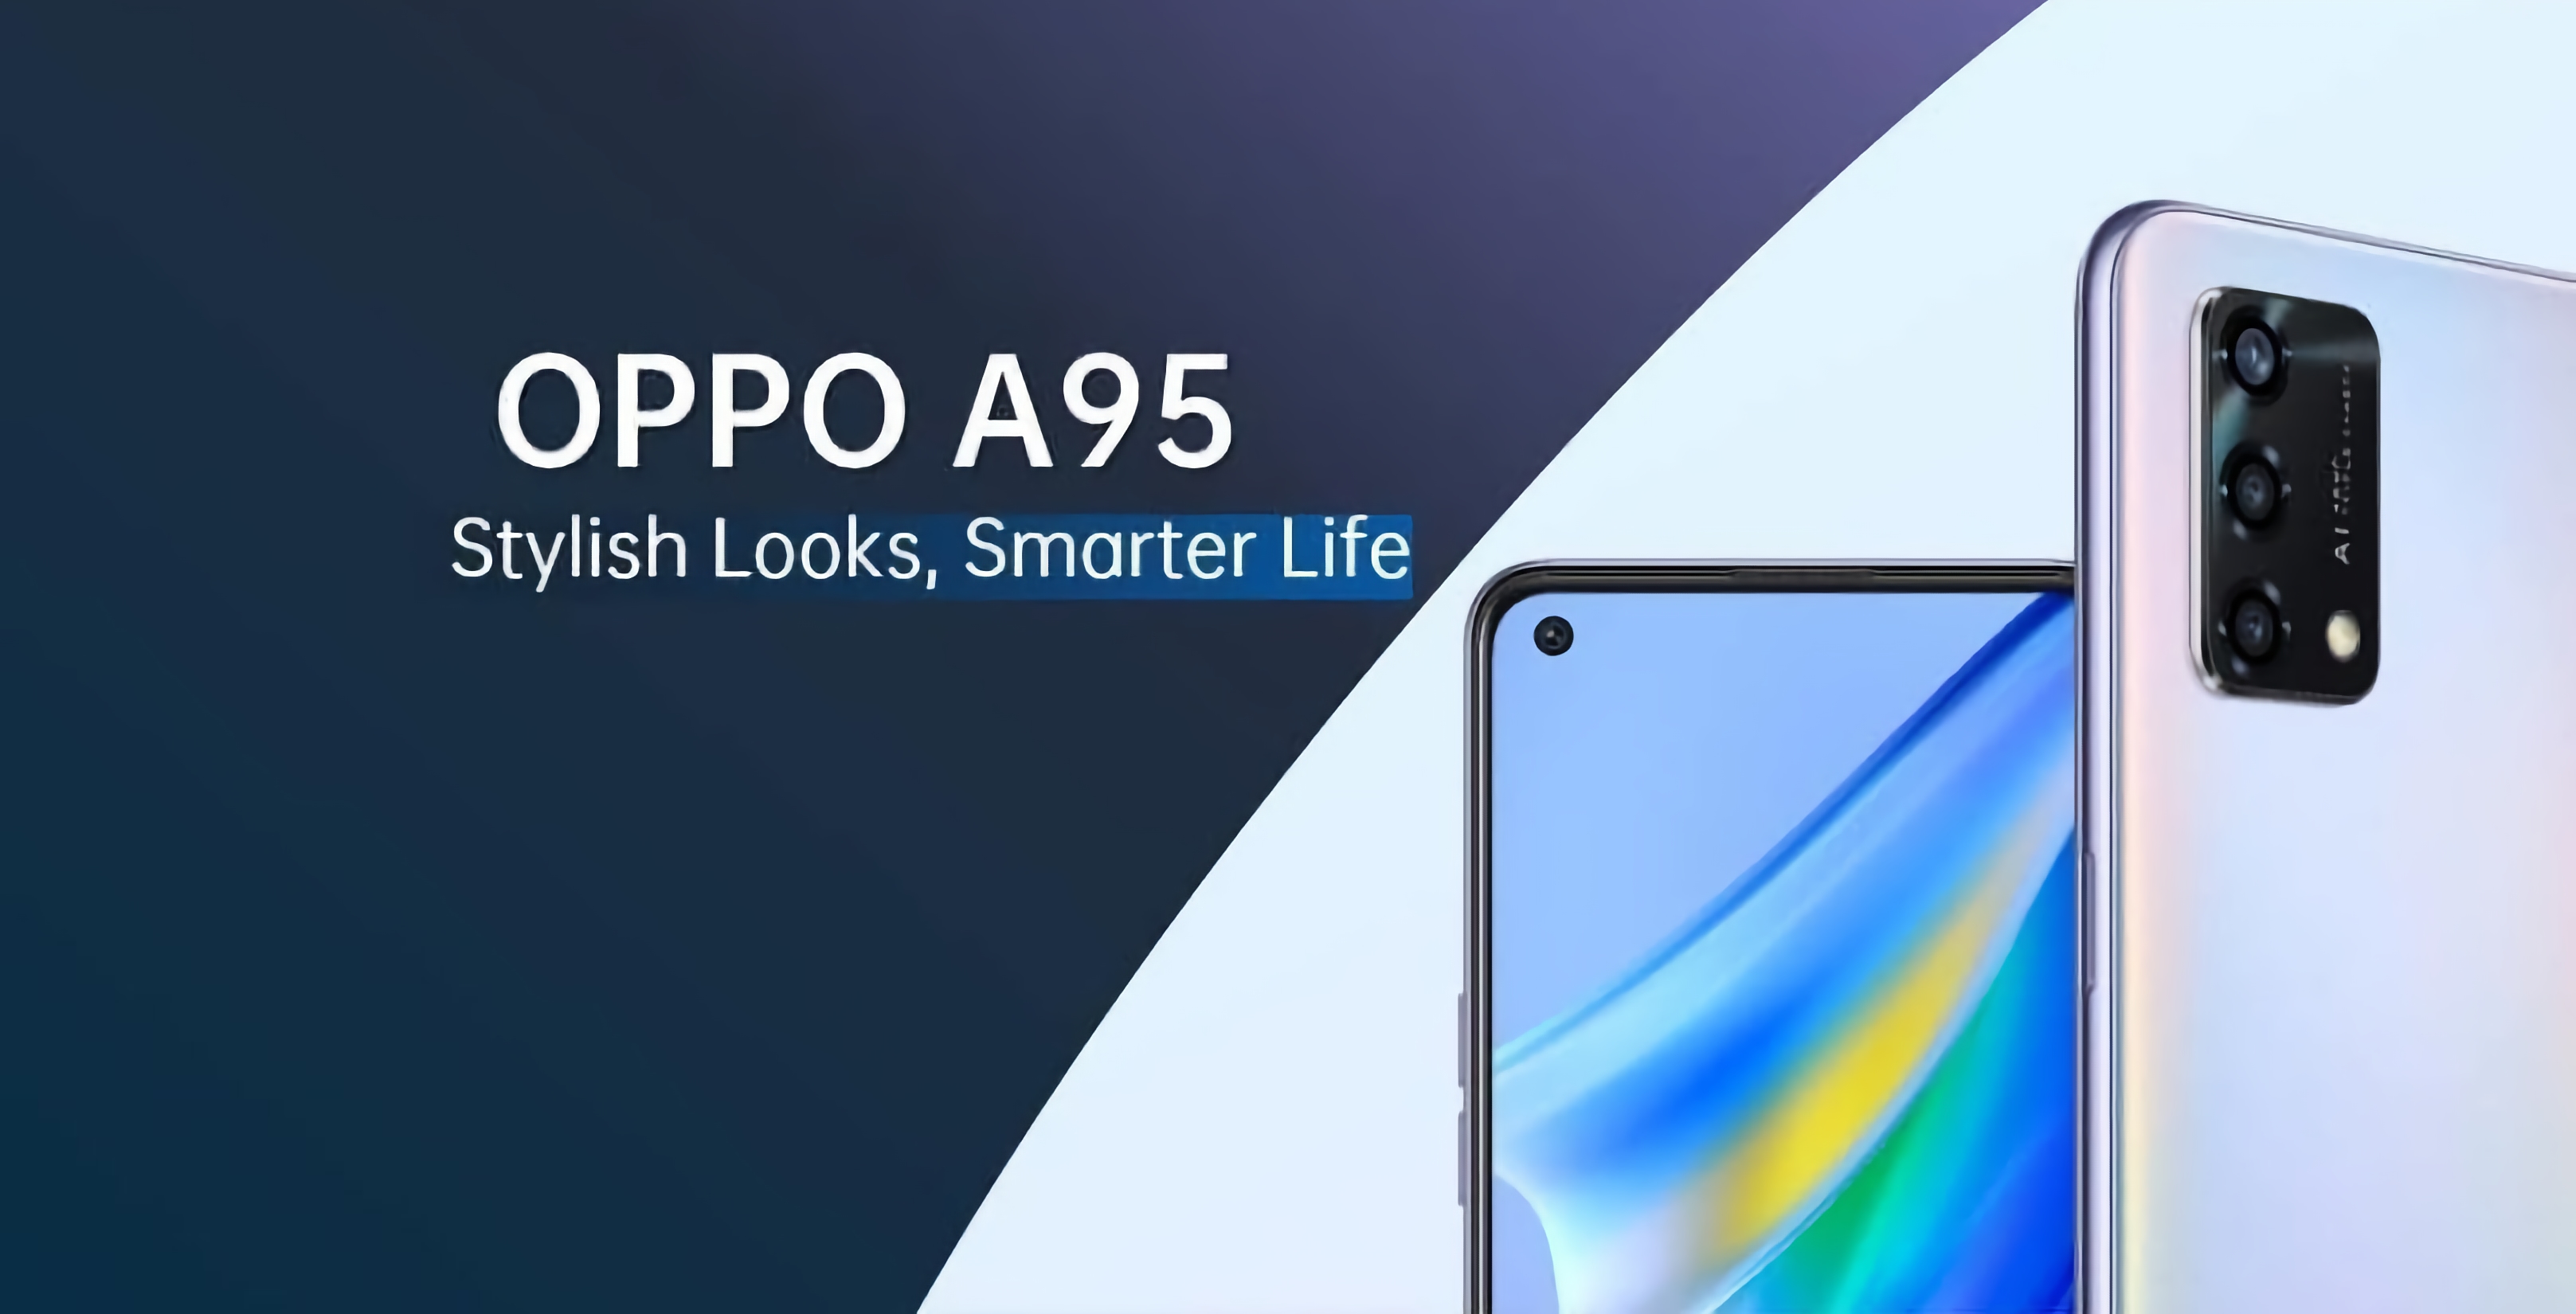 OPPO A95 with Snapdragon 662 chip, 5000mAh battery and 33W fast charging to launch this month